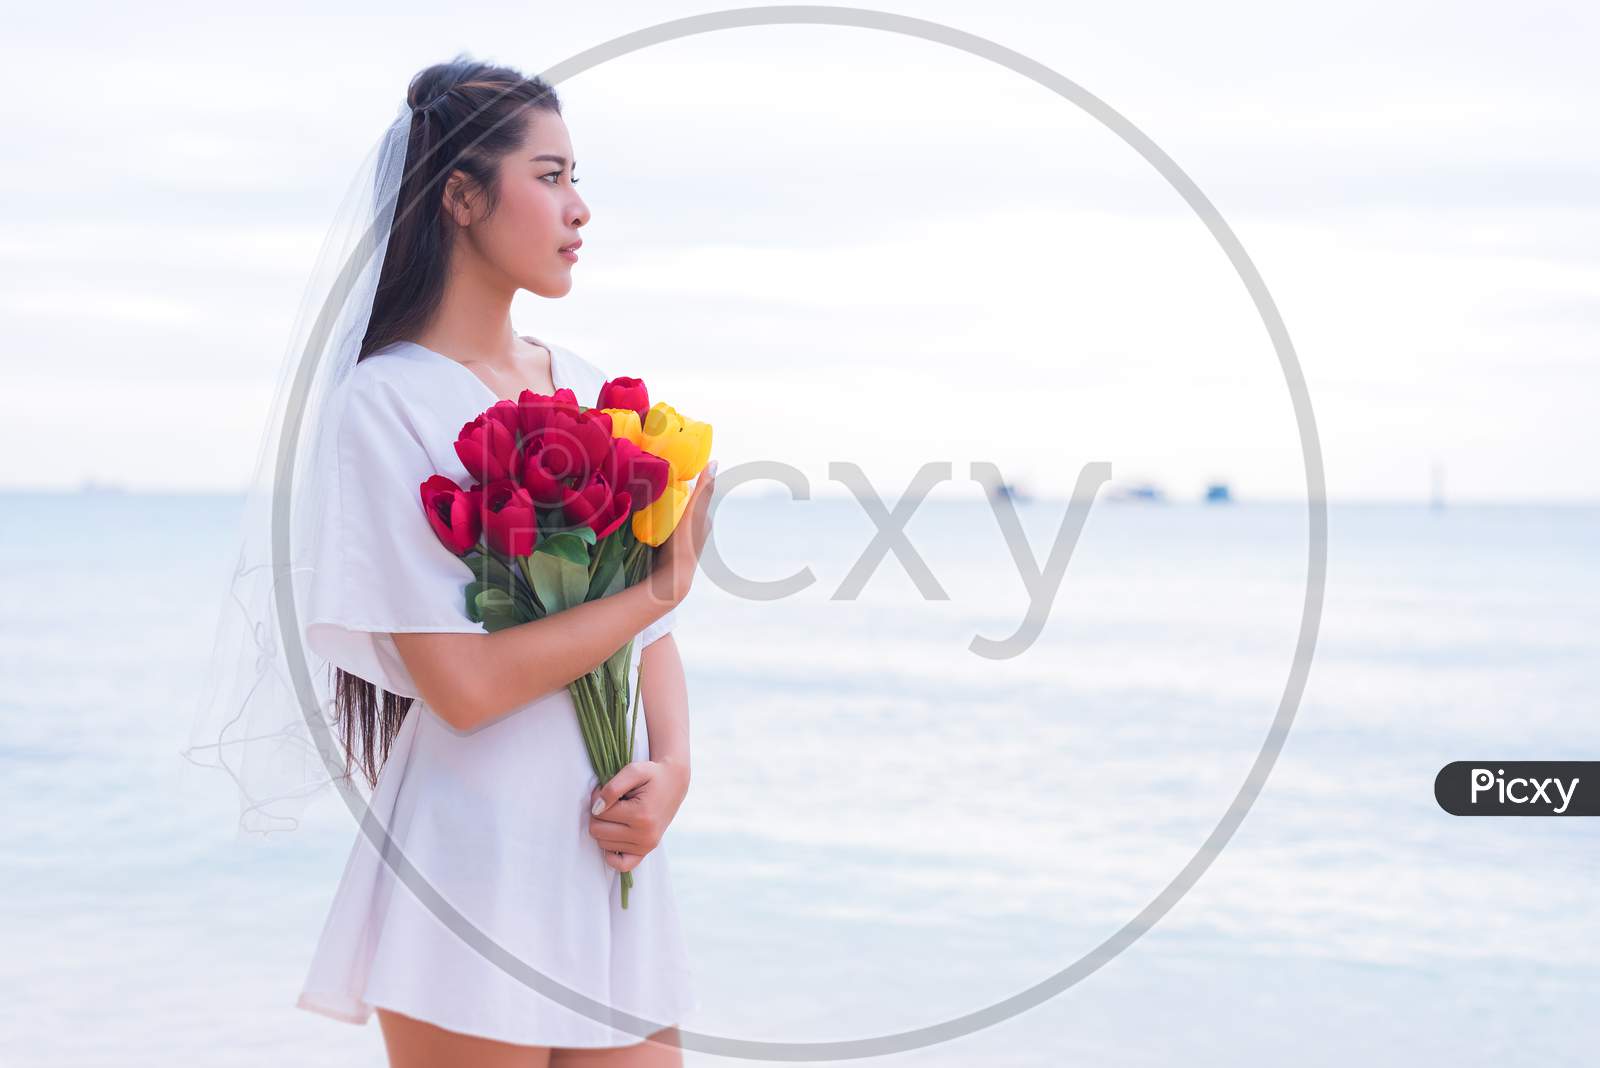 Asian Woman Holding Flowers And Waiting For Someone Make Her Happy. Lonely And Single Woman Concept. Sadness And Destiny Concept. Beauty And Nature Theme. Ocean And Sea Theme. Finding Soulmate Theme.